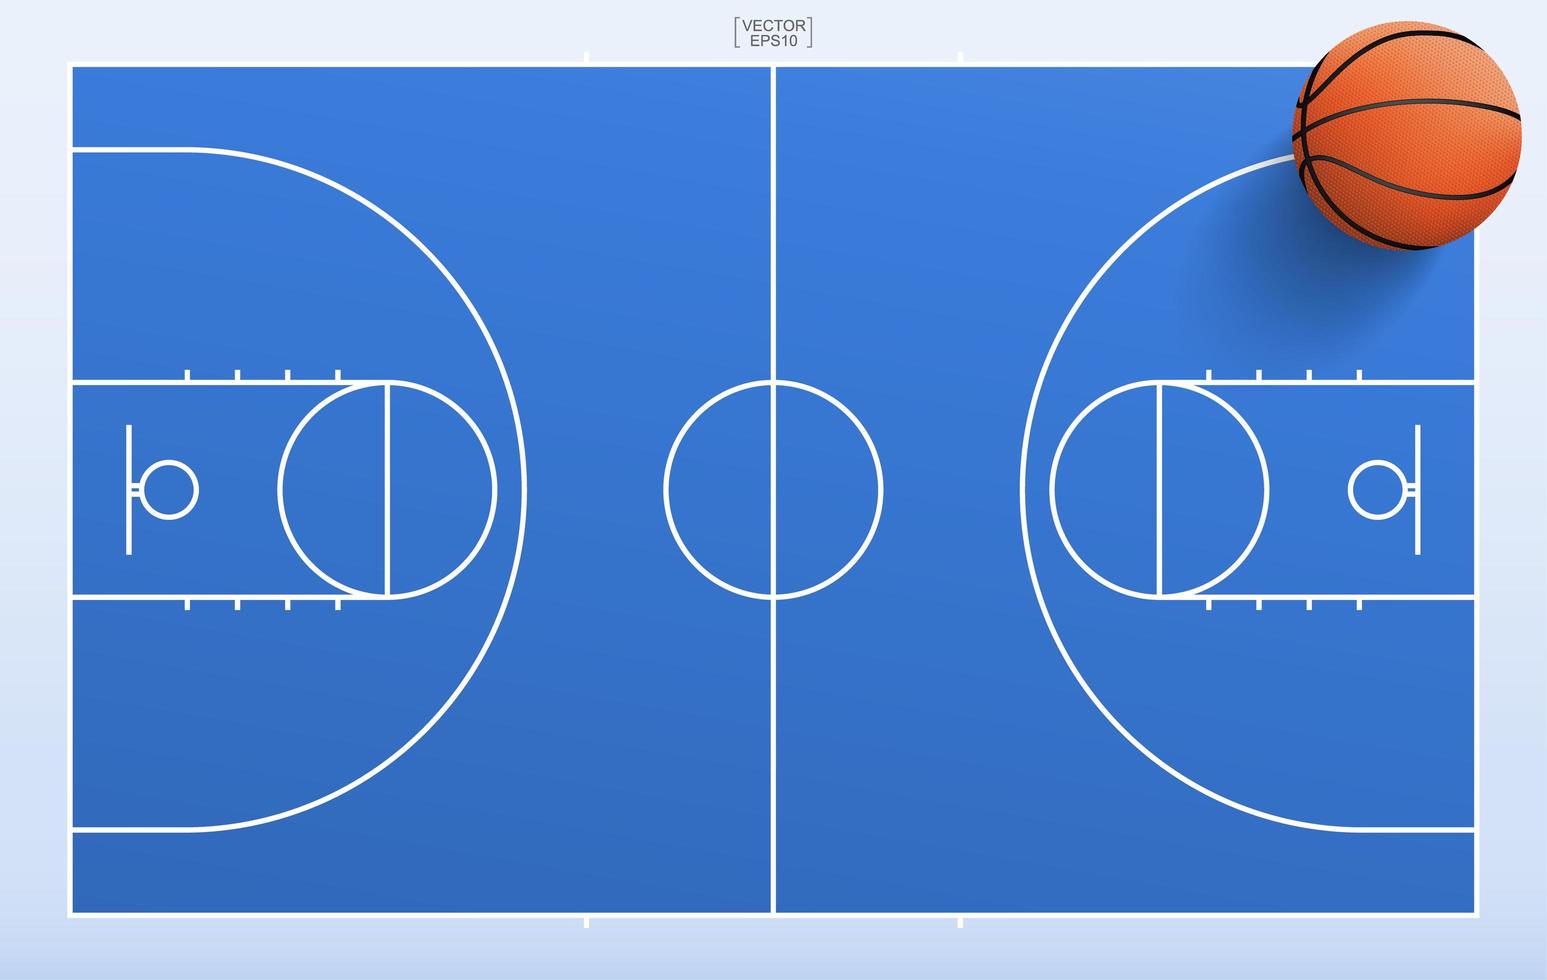 Top down view of basketball and court vector